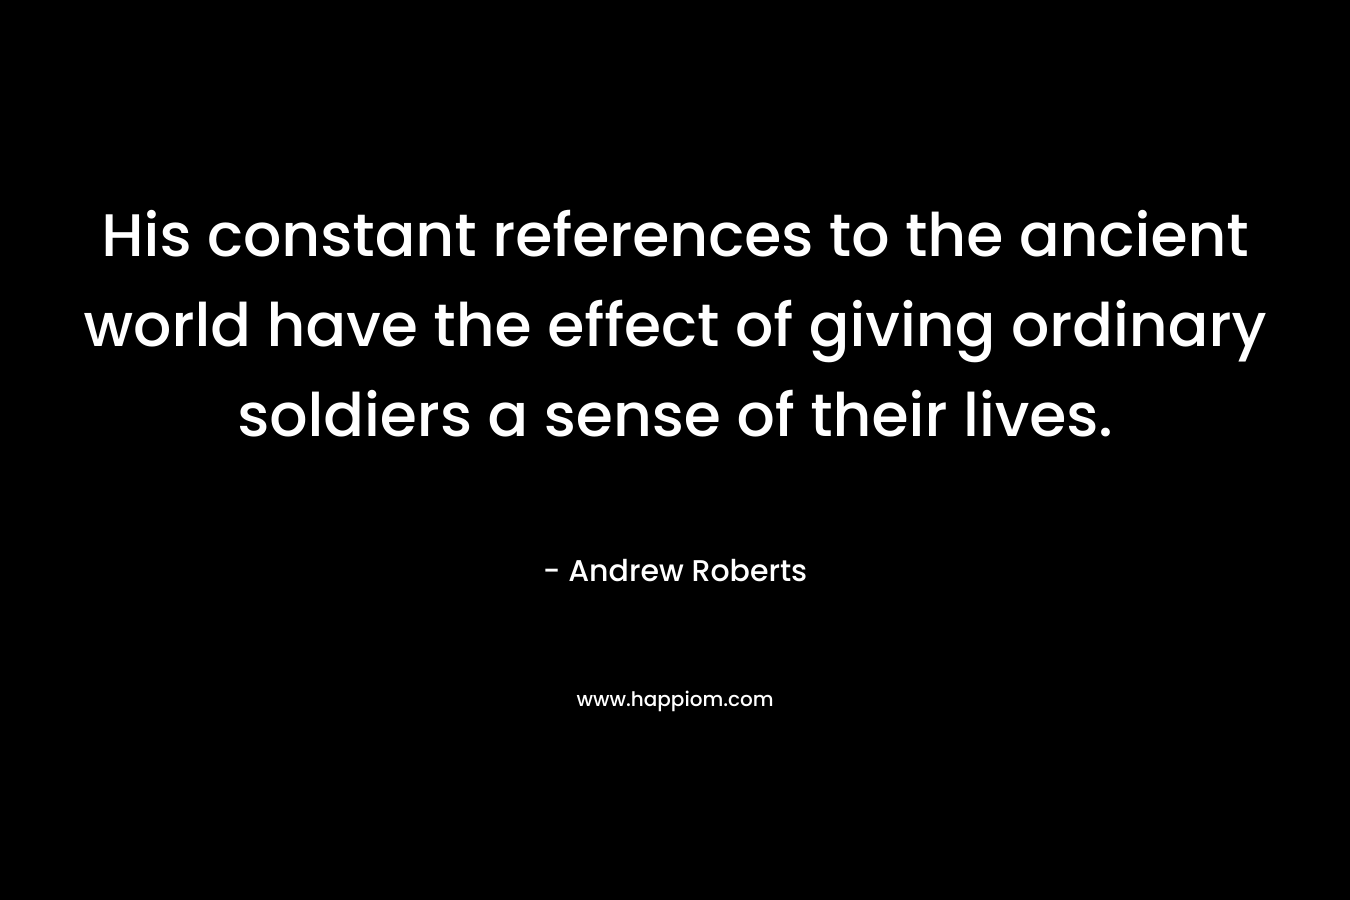 His constant references to the ancient world have the effect of giving ordinary soldiers a sense of their lives. – Andrew Roberts